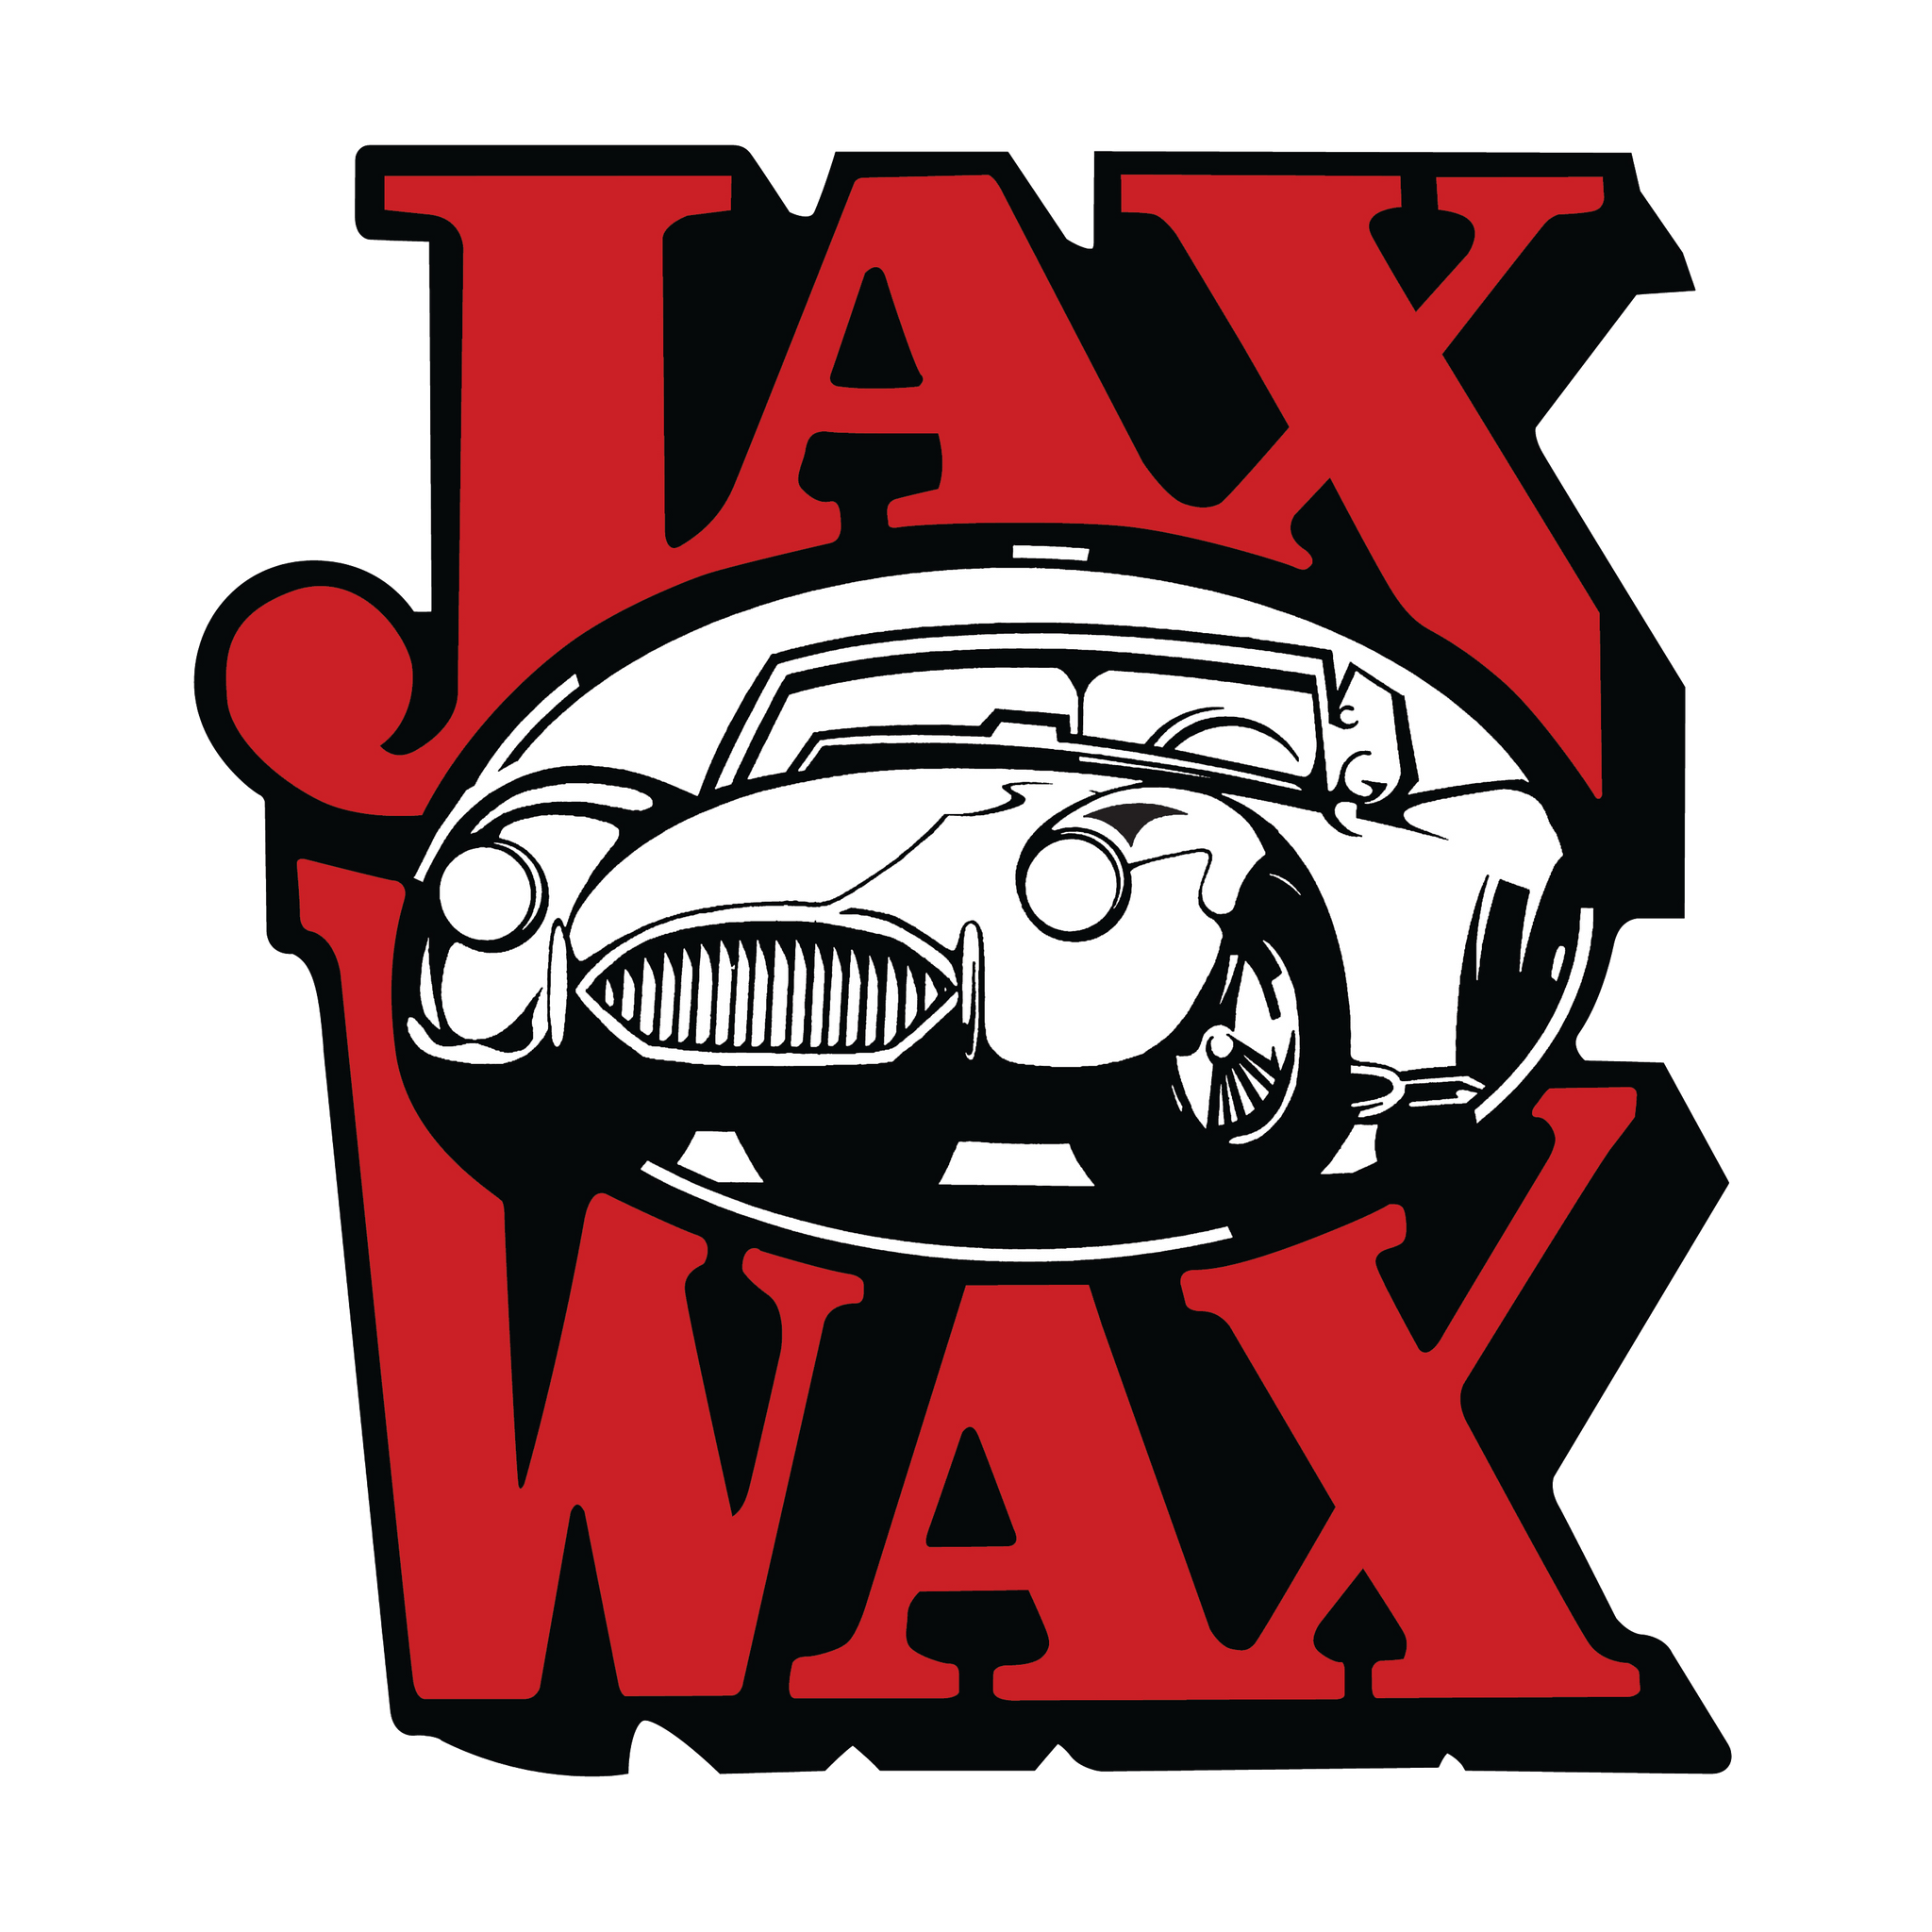 JAX WAX - Does It Really Work - I purchased several products including the  Hawaiian shine to test 